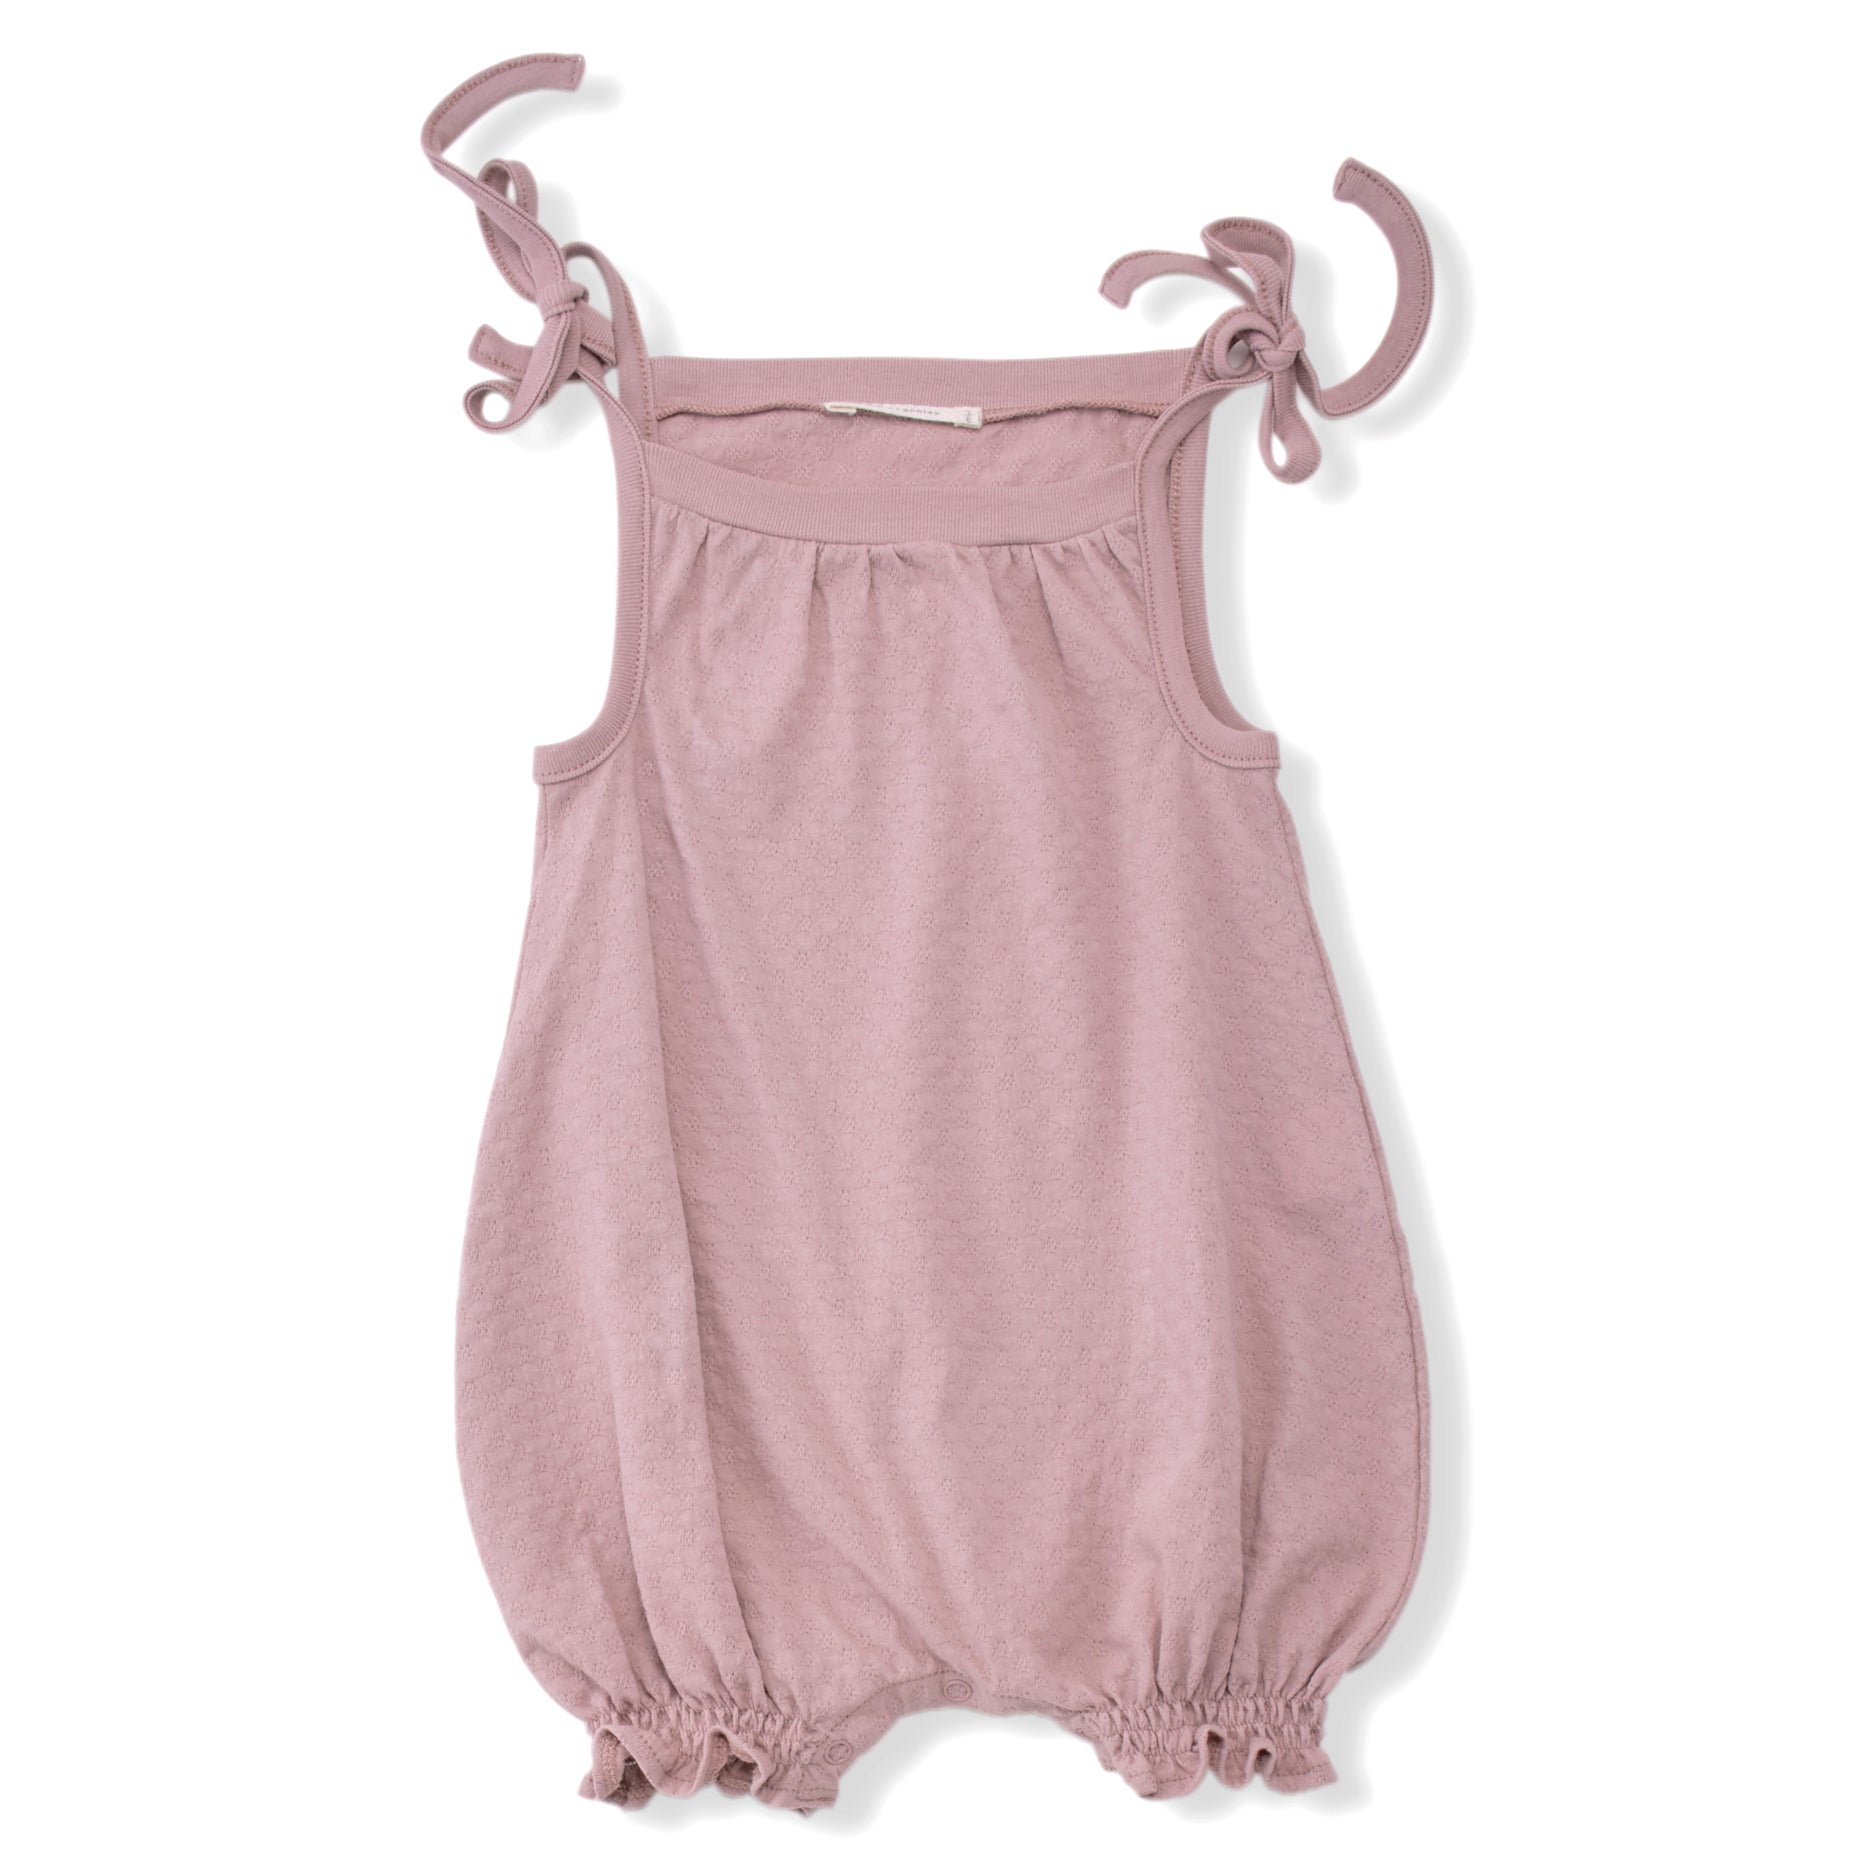 Rounded Romper with Ties